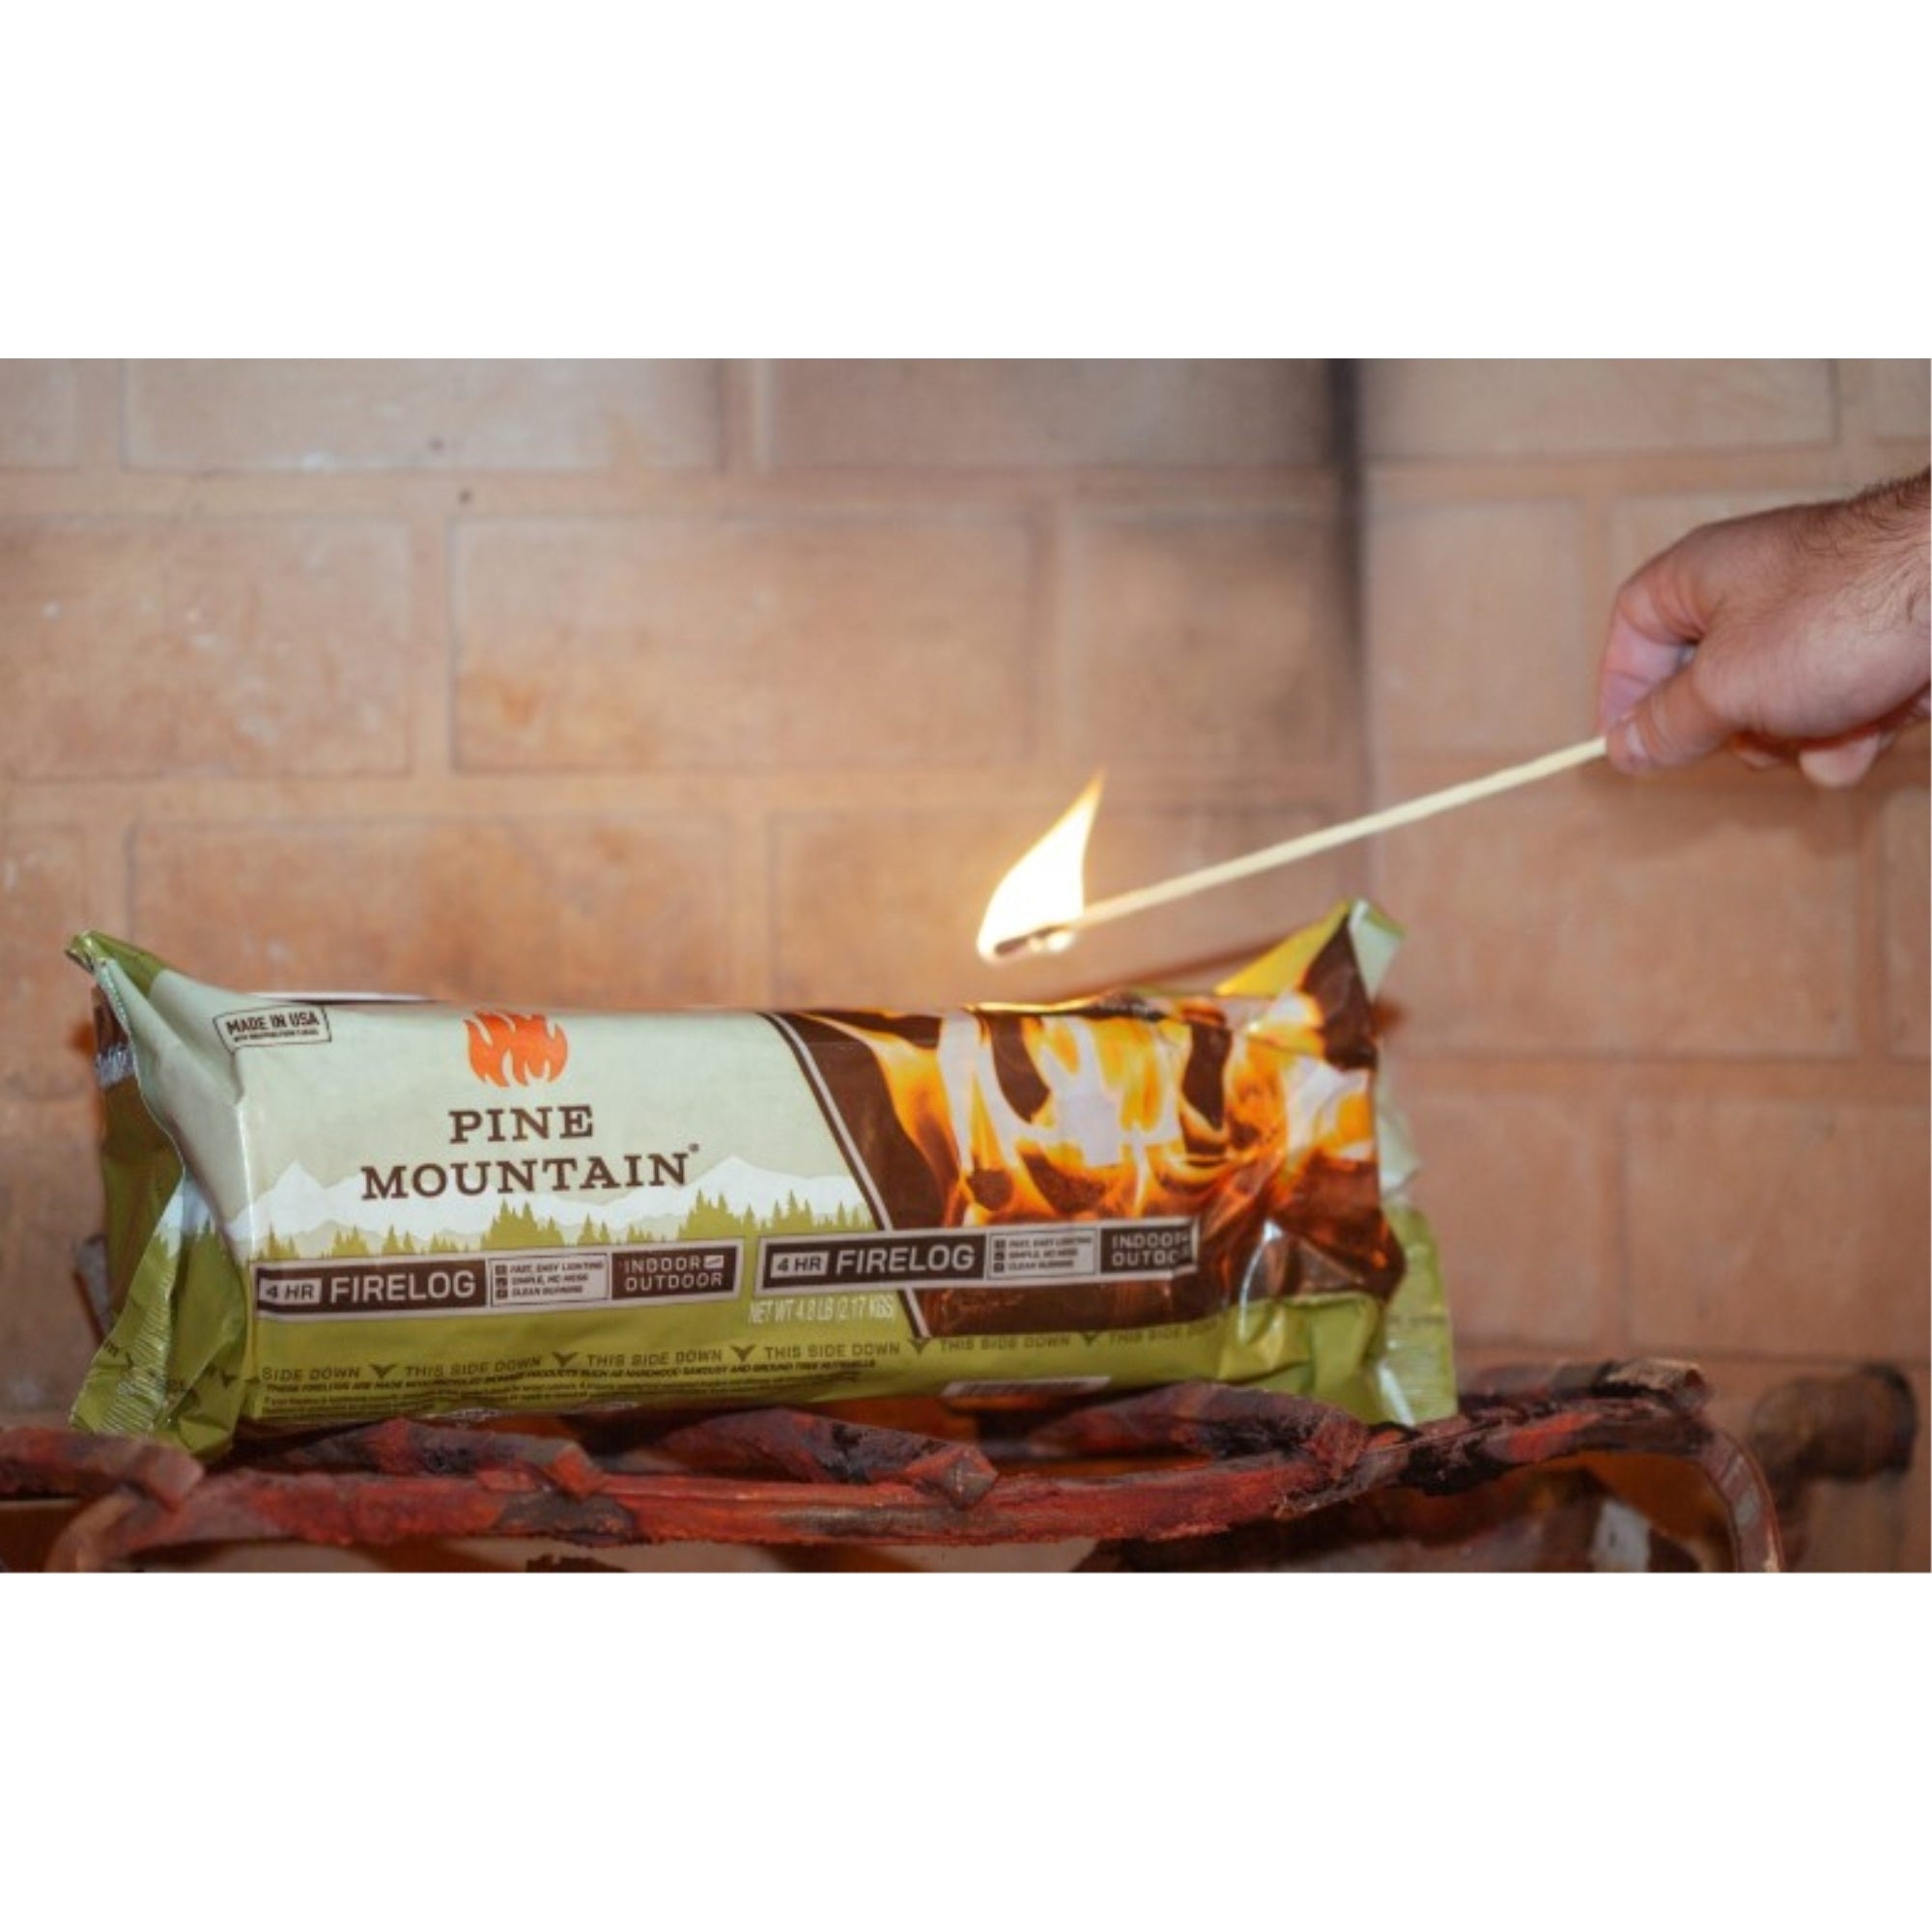 Pine Mountain Traditional Indoor/Outdoor 4-Hour Burning Fire Logs, 6 Pack